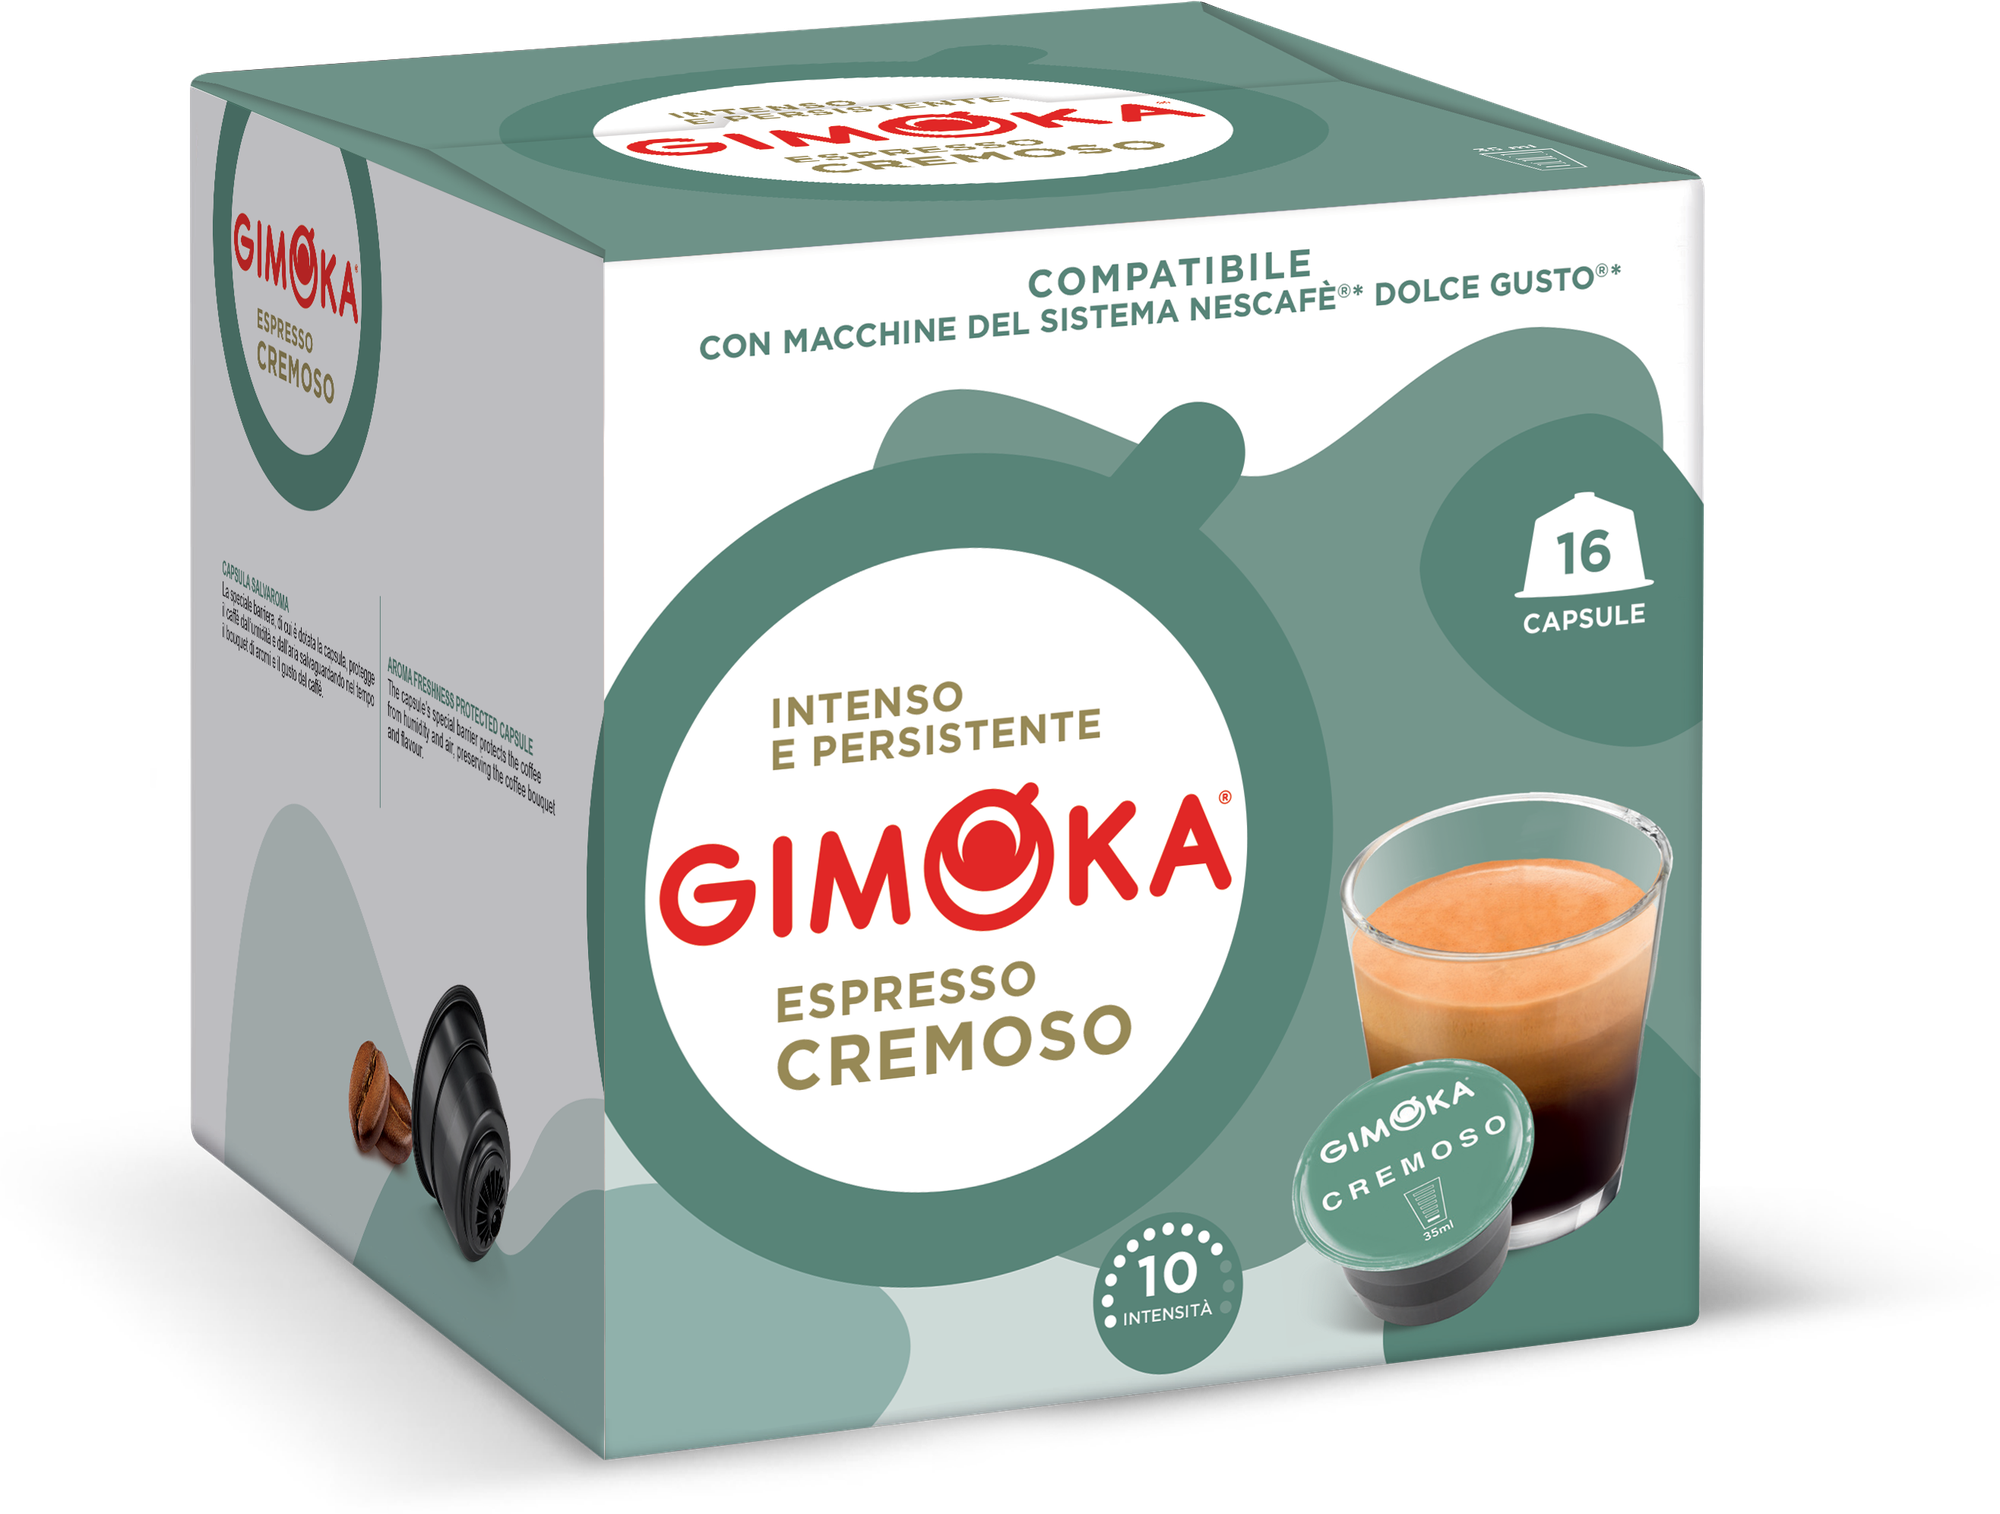 Капсулы формата Dolce Gusto, Gimoka Espresso Cremoso, 16 капсул